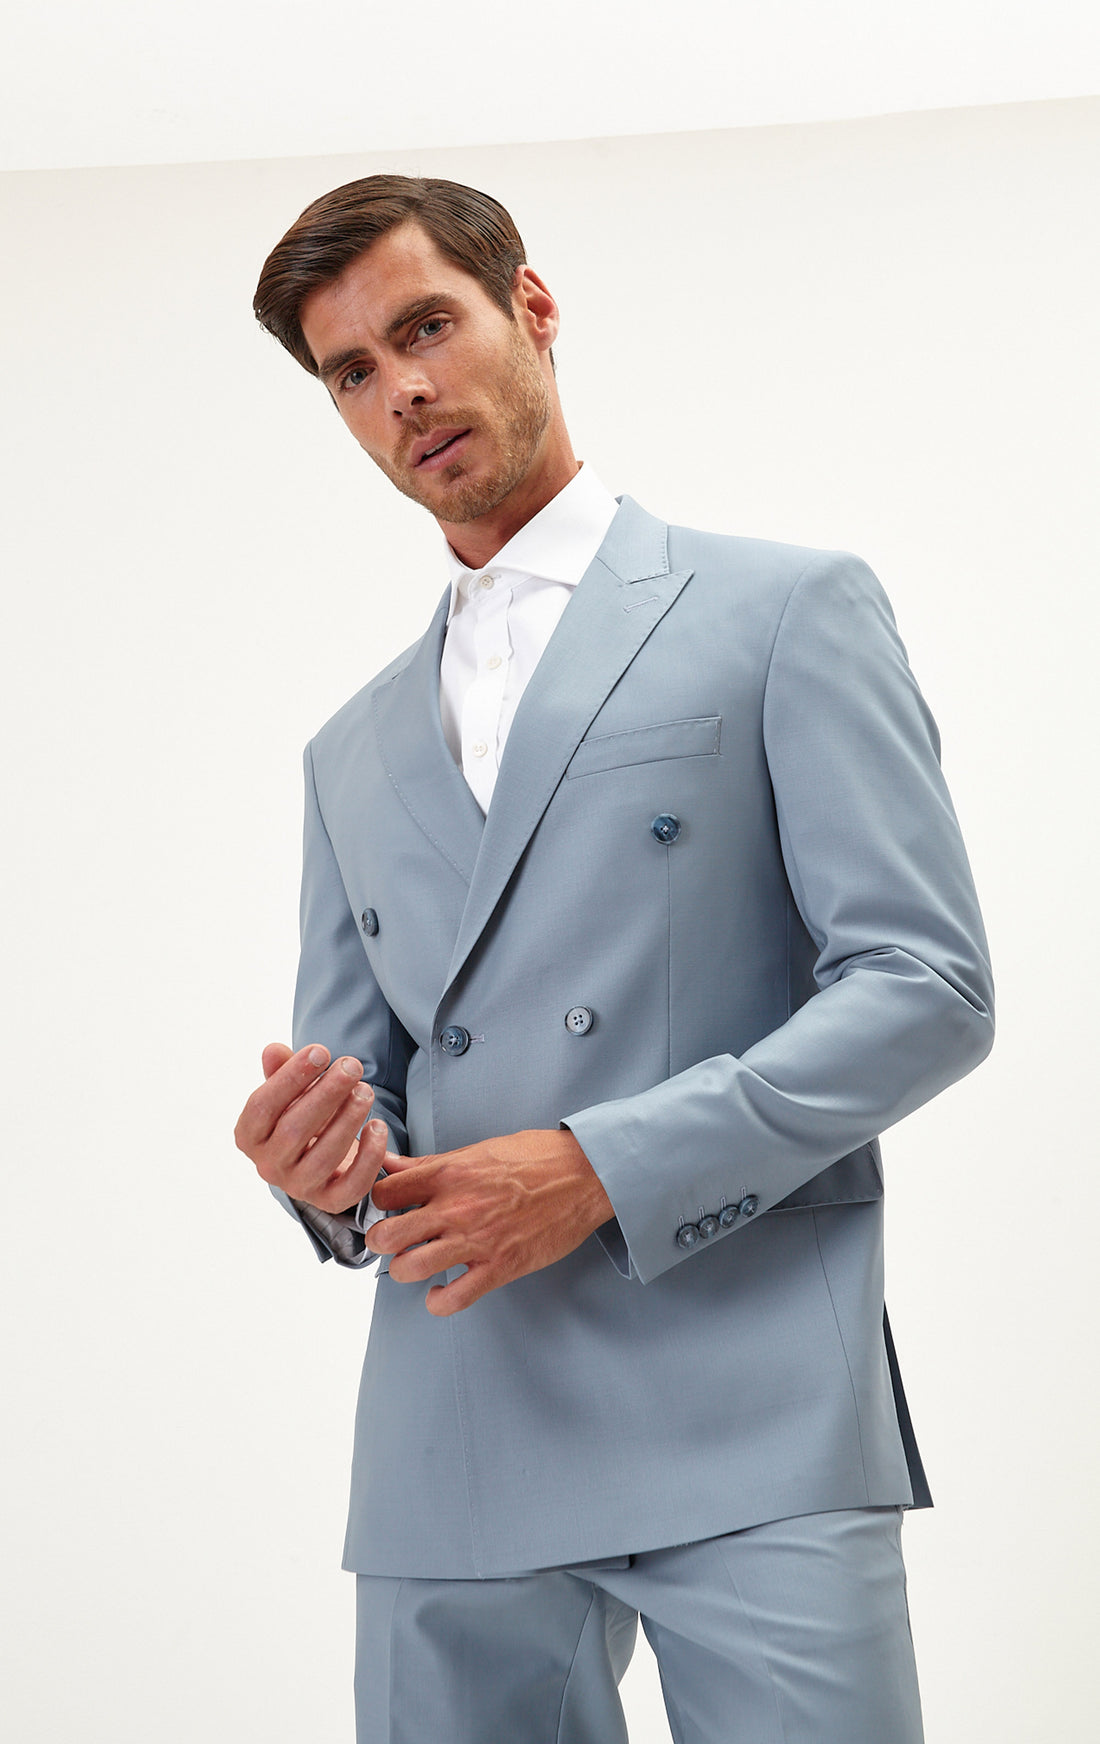 N° R206 Double Breasted Merino Wool Suit - Cool Grey - Ron Tomson